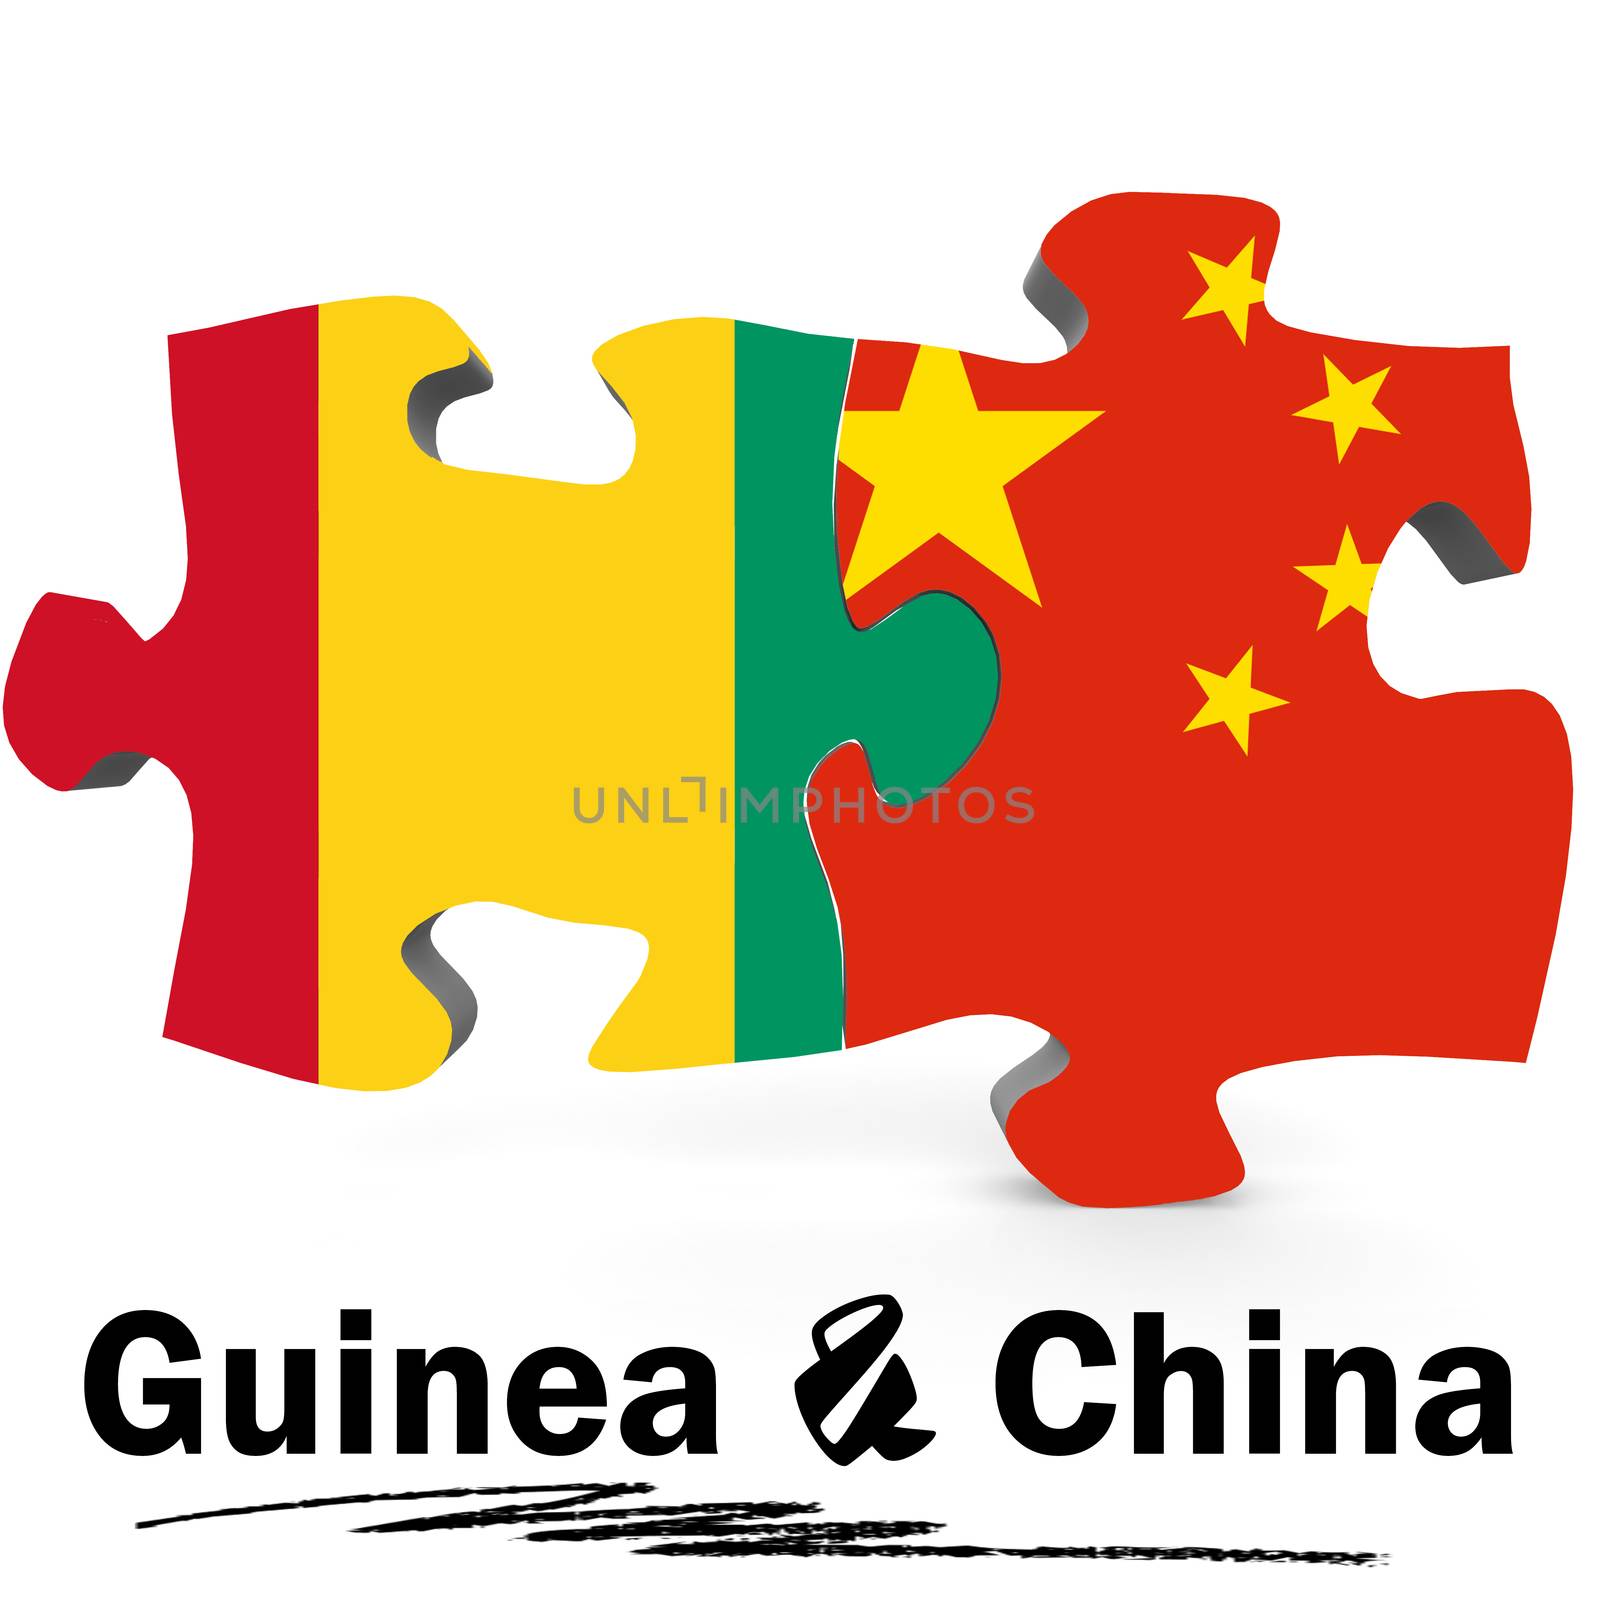 China and Guinea Flags in puzzle isolated on white background, 3D rendering